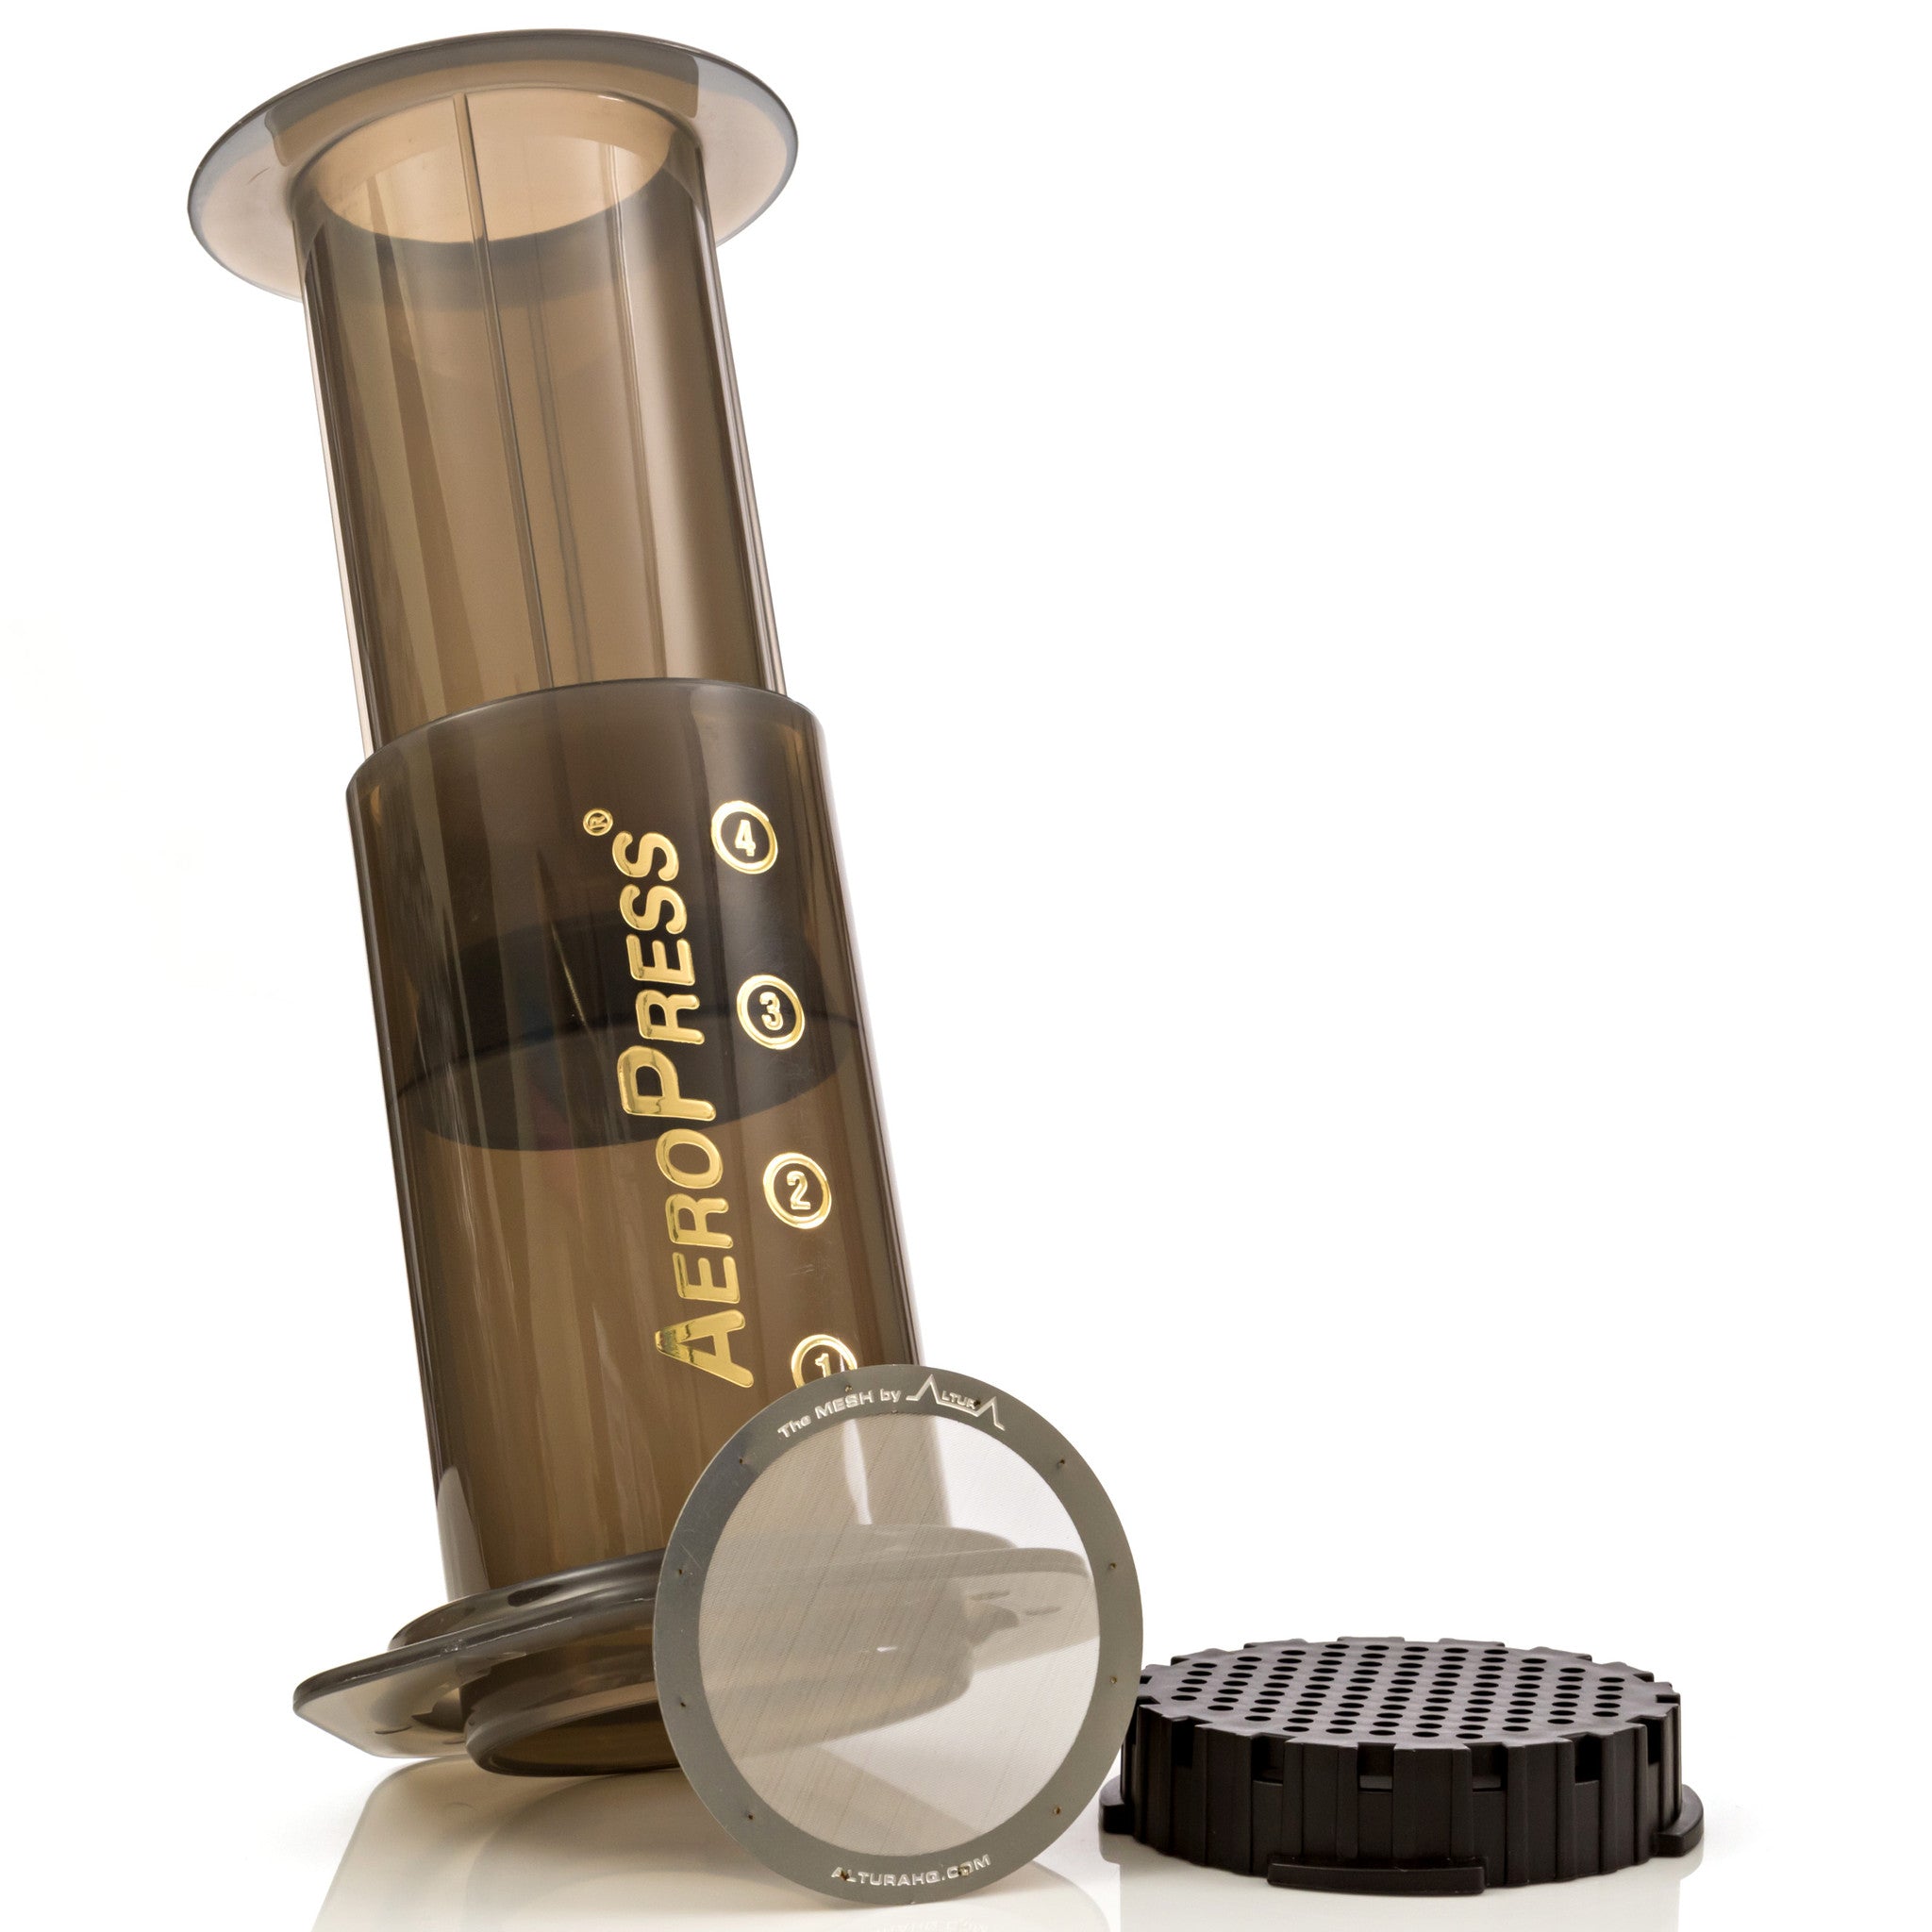 The MESH: Reusable Metal Filter for AeroPress Coffee Maker. Also Fits  AeroPress Go coffee press. No More Paper Filters